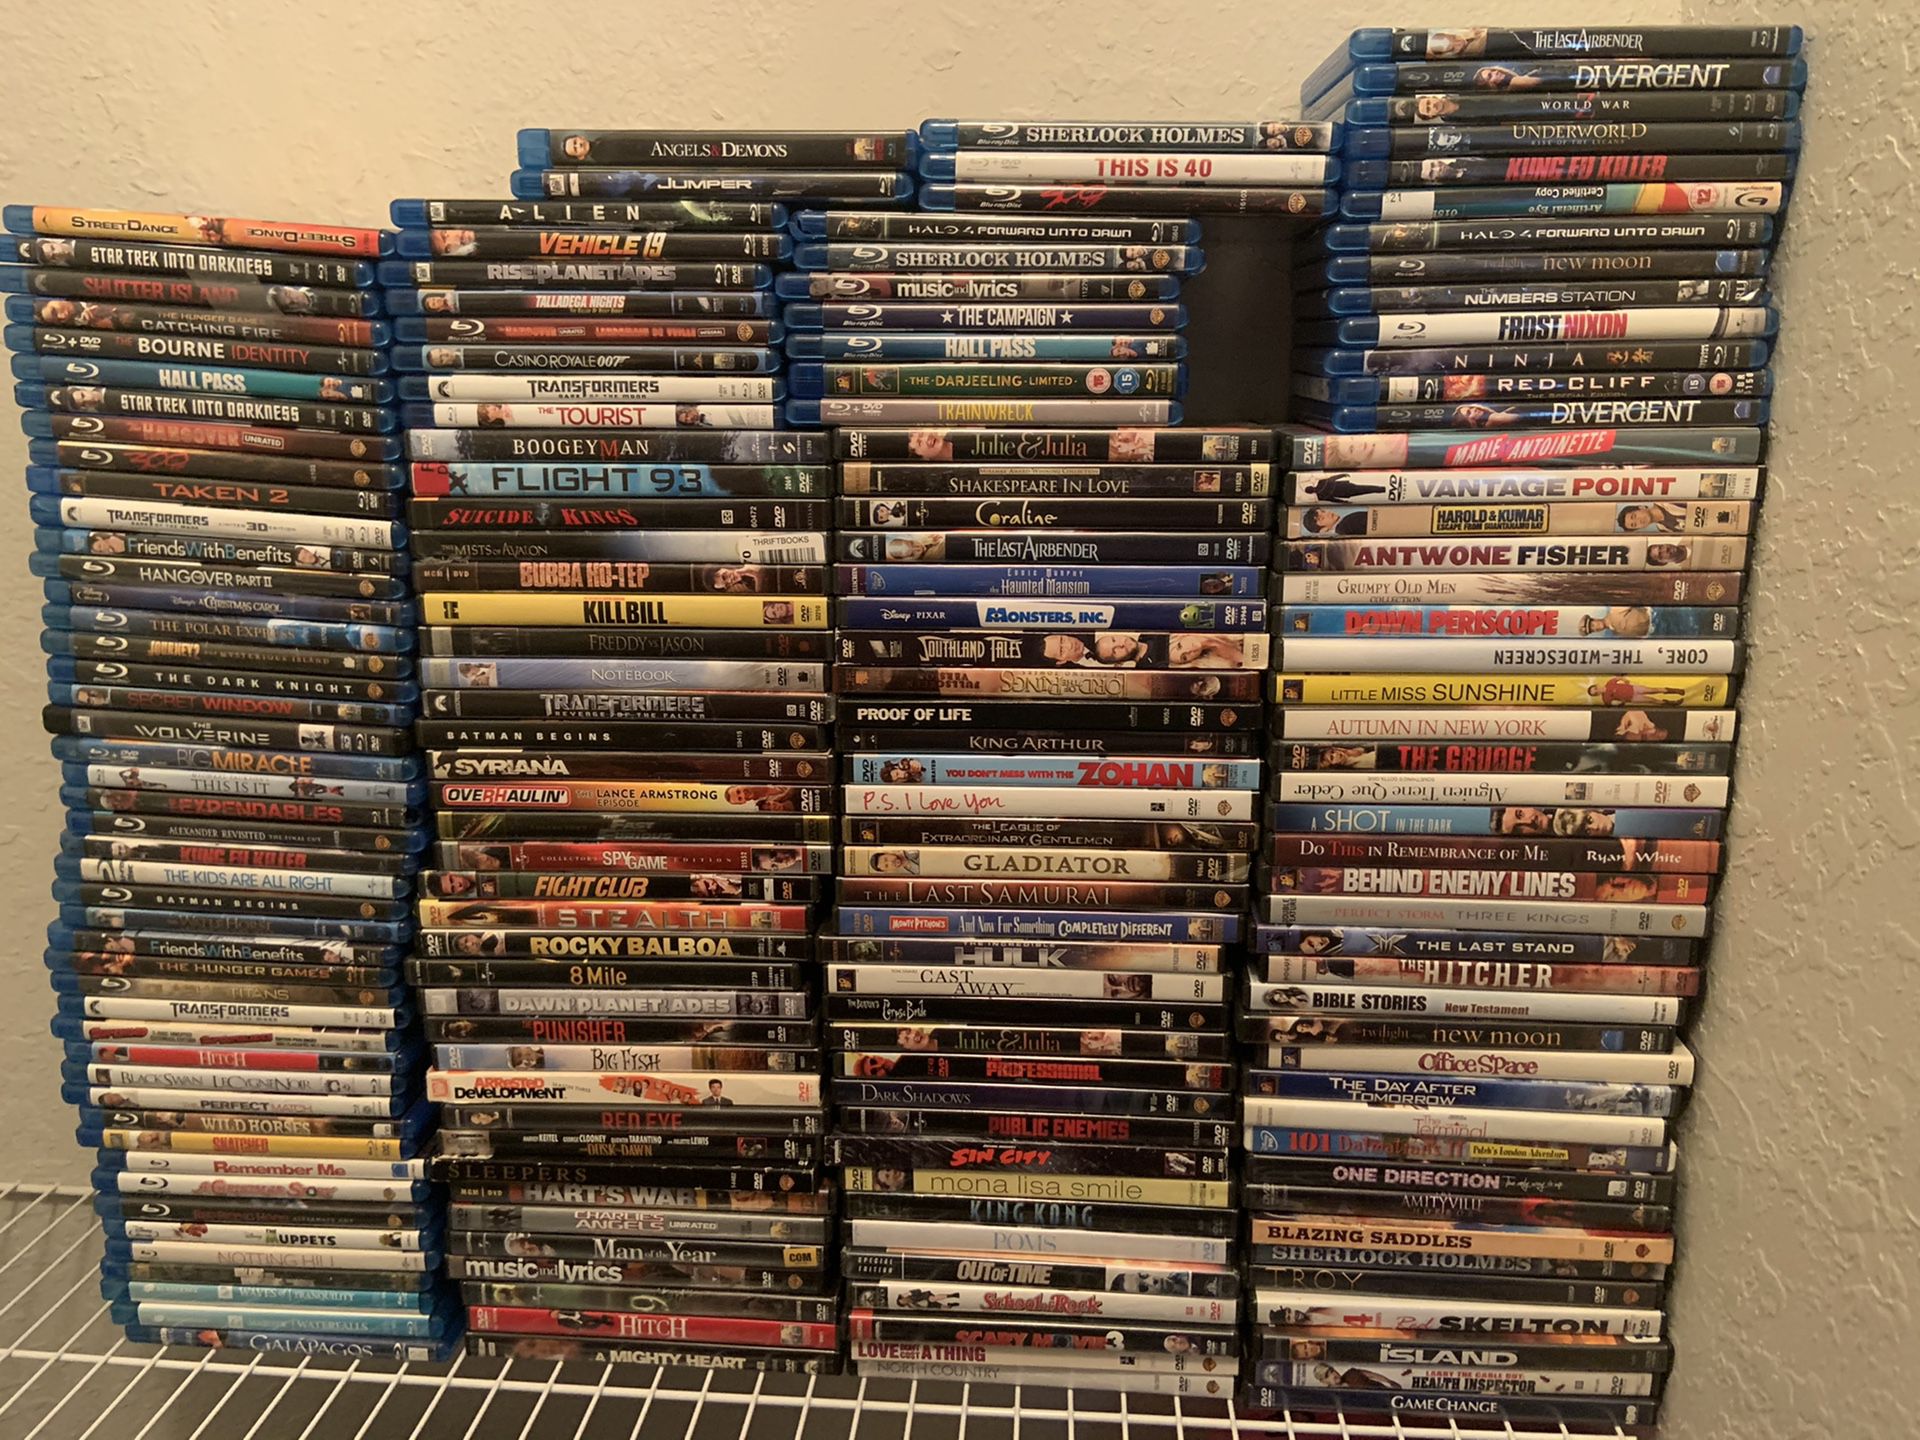 Blu-rays and Dvds